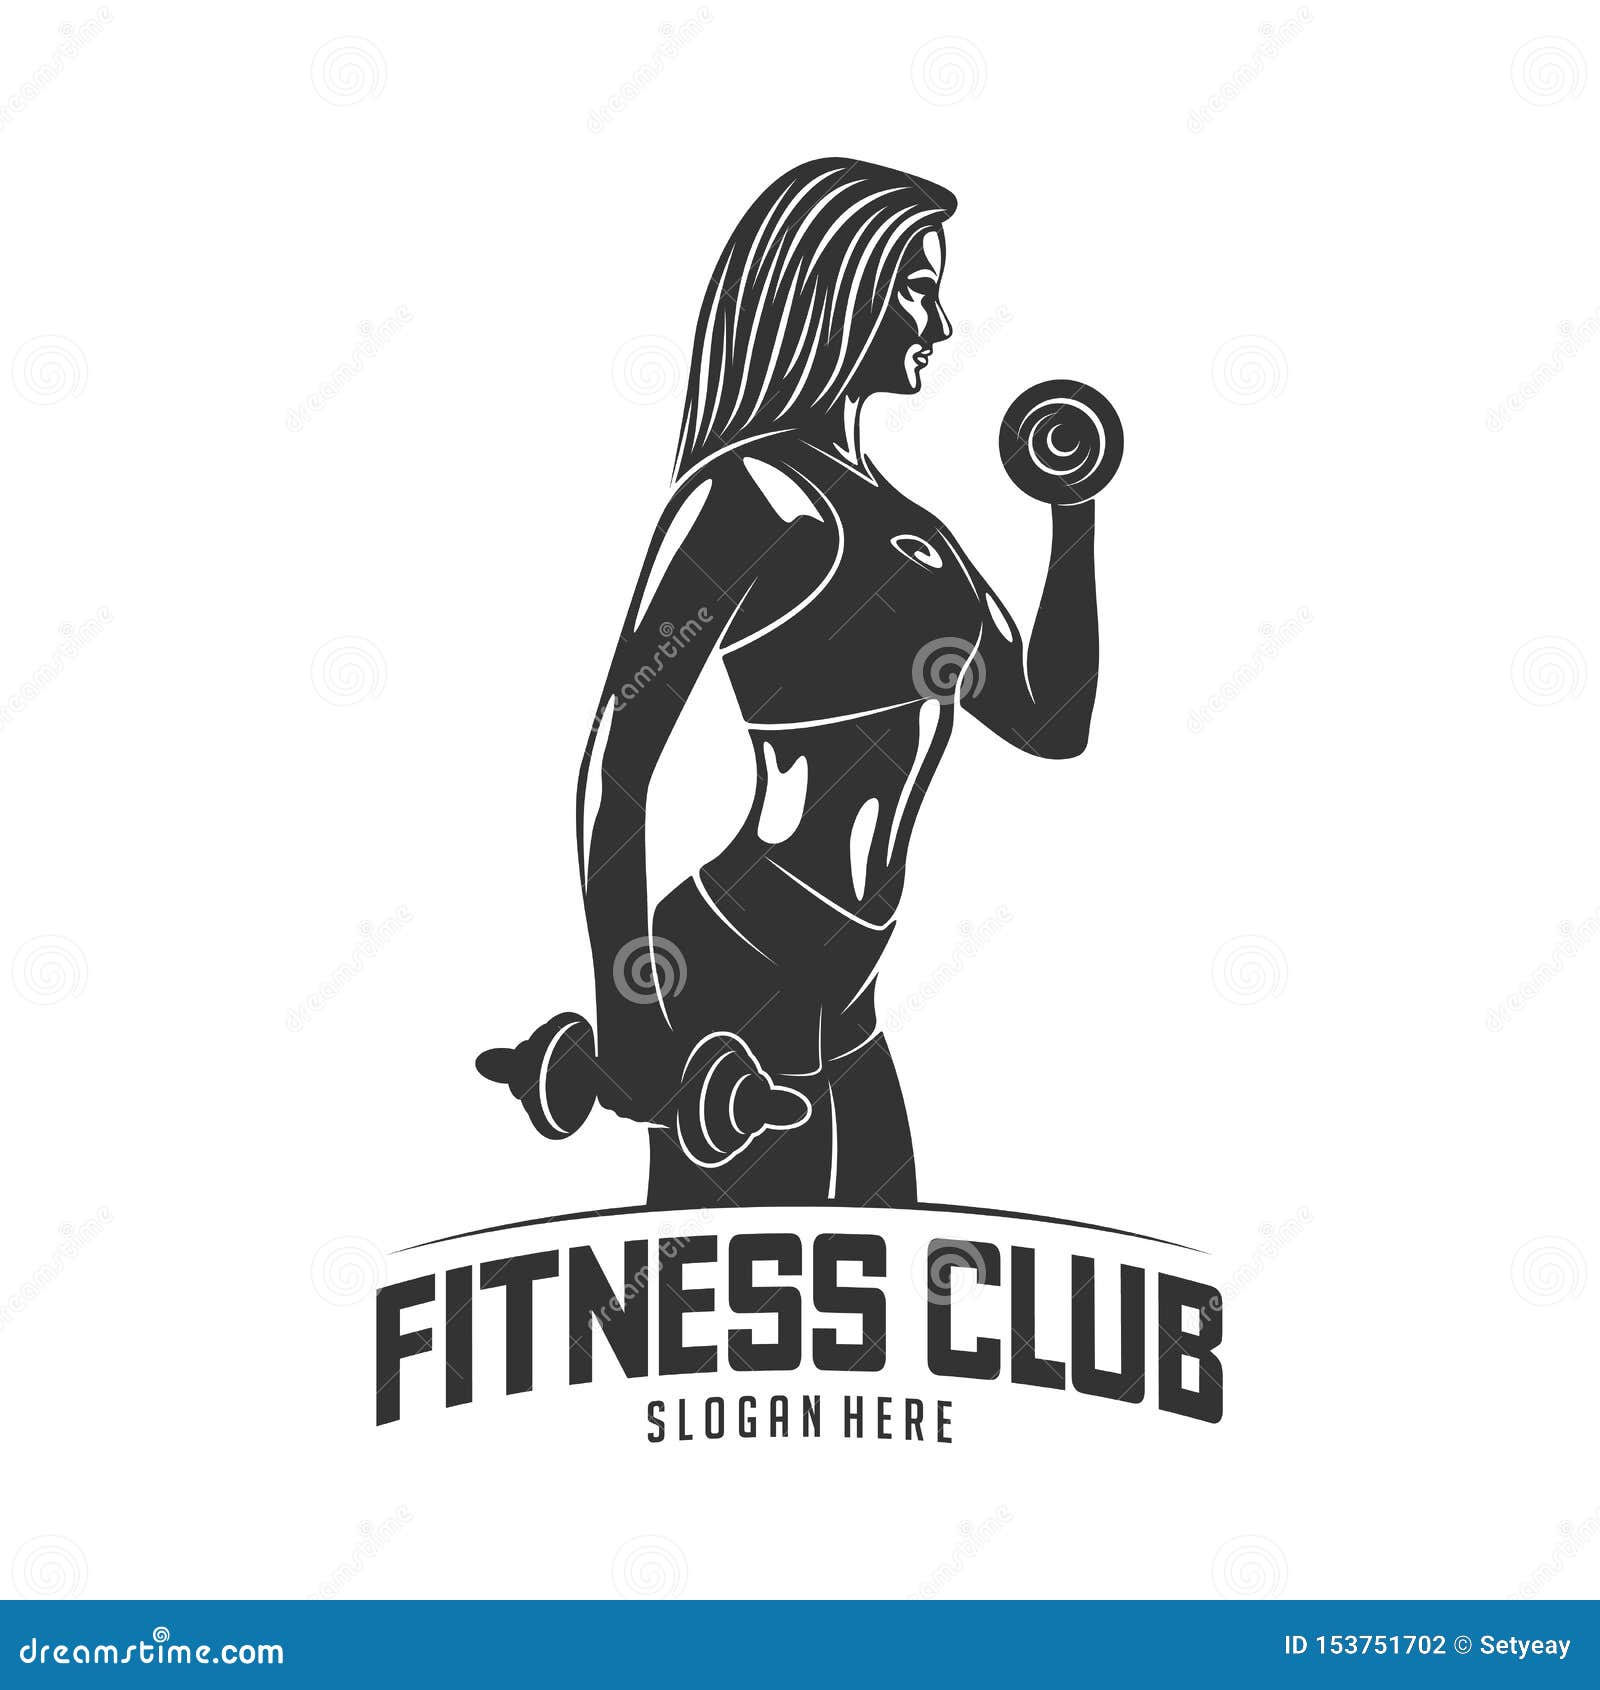 Fitness Vector Logo Design Template Design For Gym And Fitness Vector Fitness Club Logo With Exercising Athletic Woman Vector Stock Vector Illustration Of Athlete Label